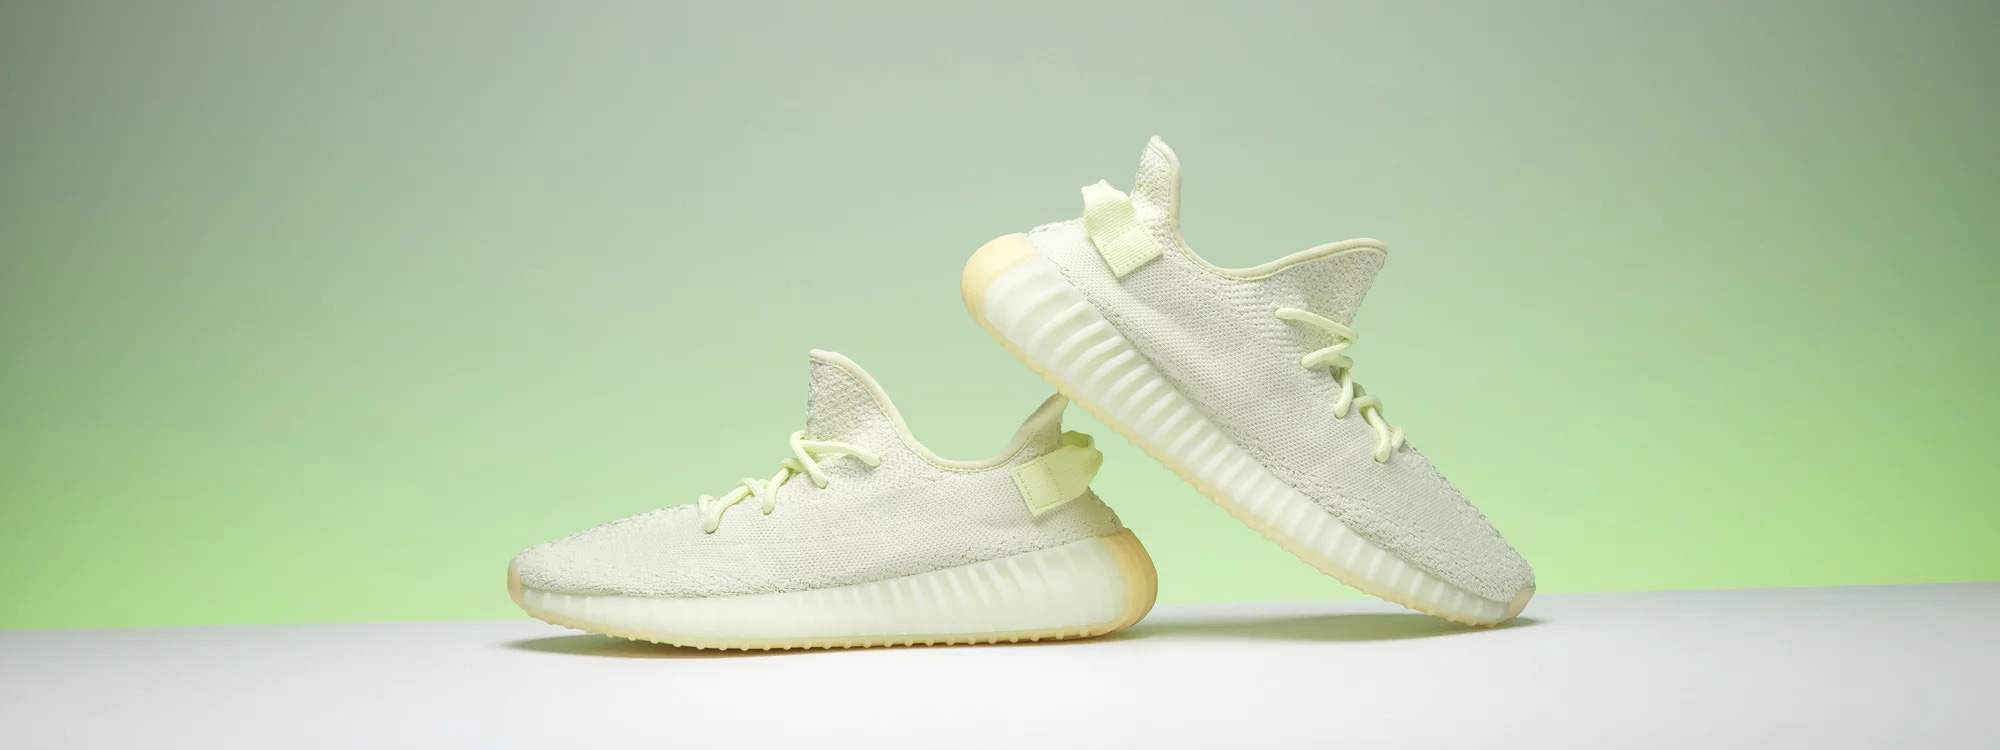 The best Adidas Yeezy Boost 350 V2 Butter